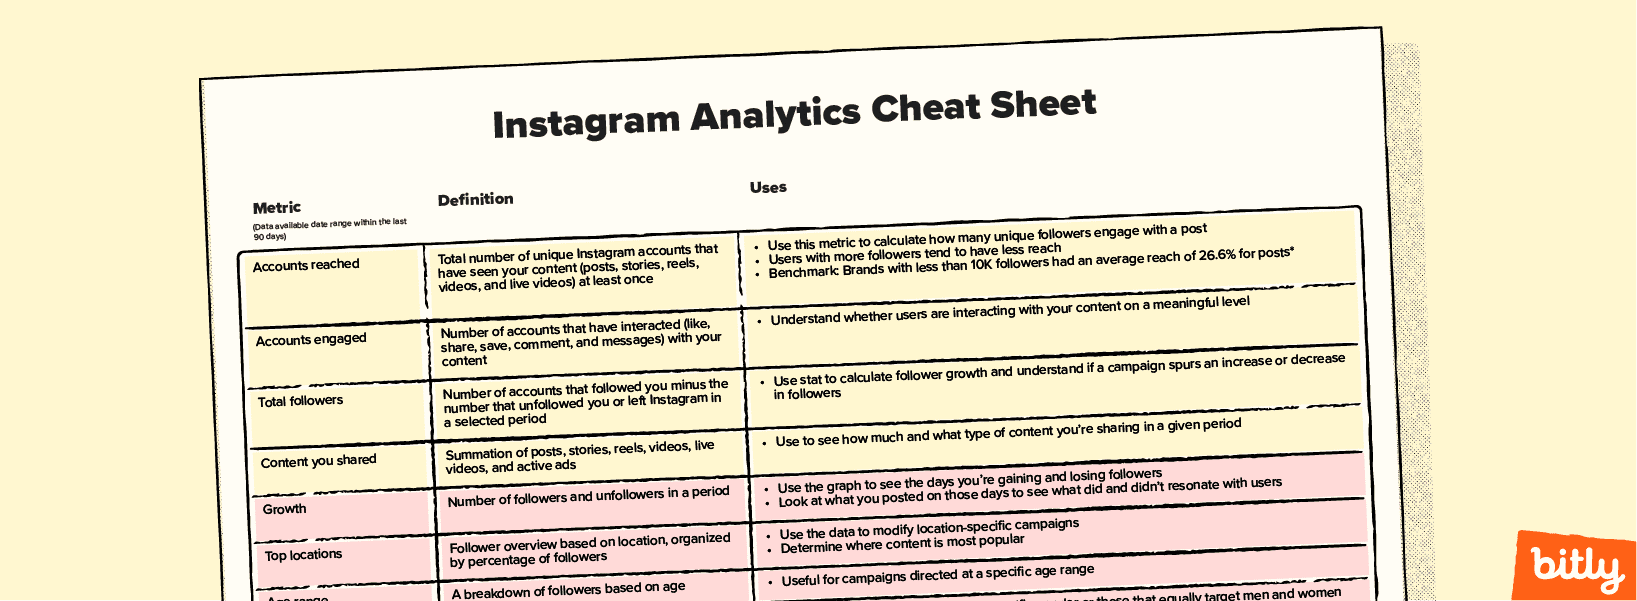 The top section of Bitly's Instagram analytics cheat sheet